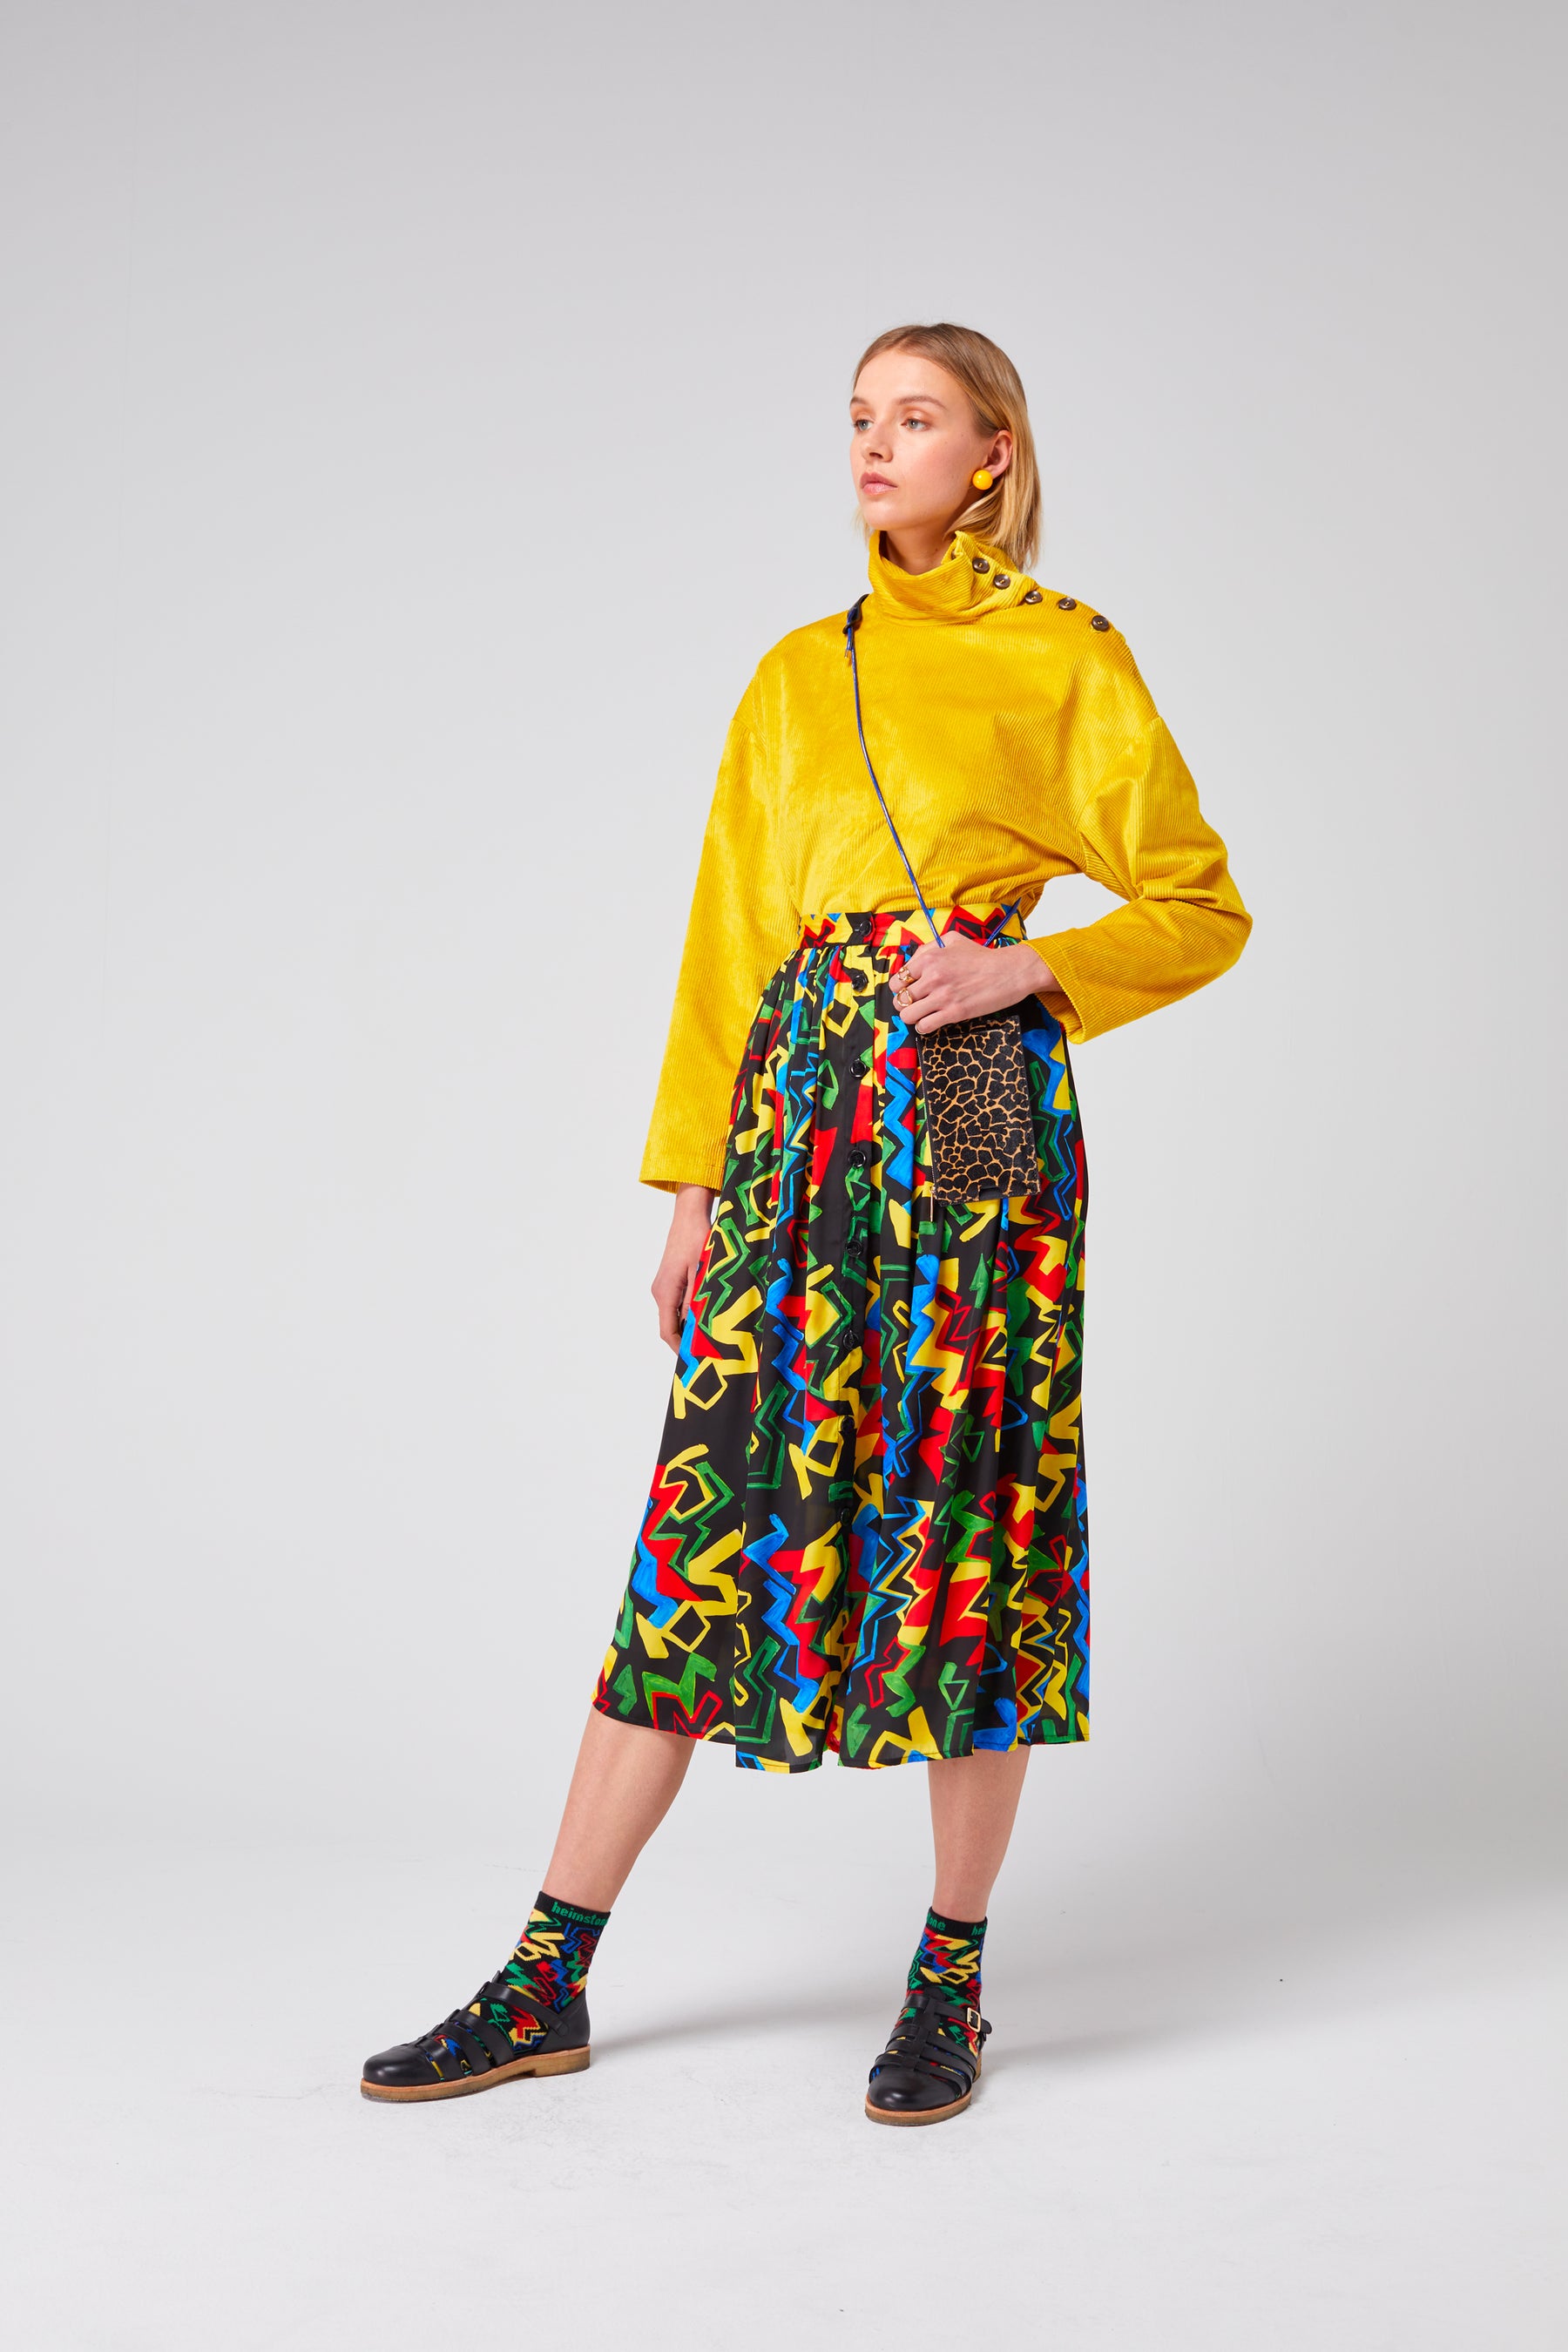 Orso skirt in Electric print